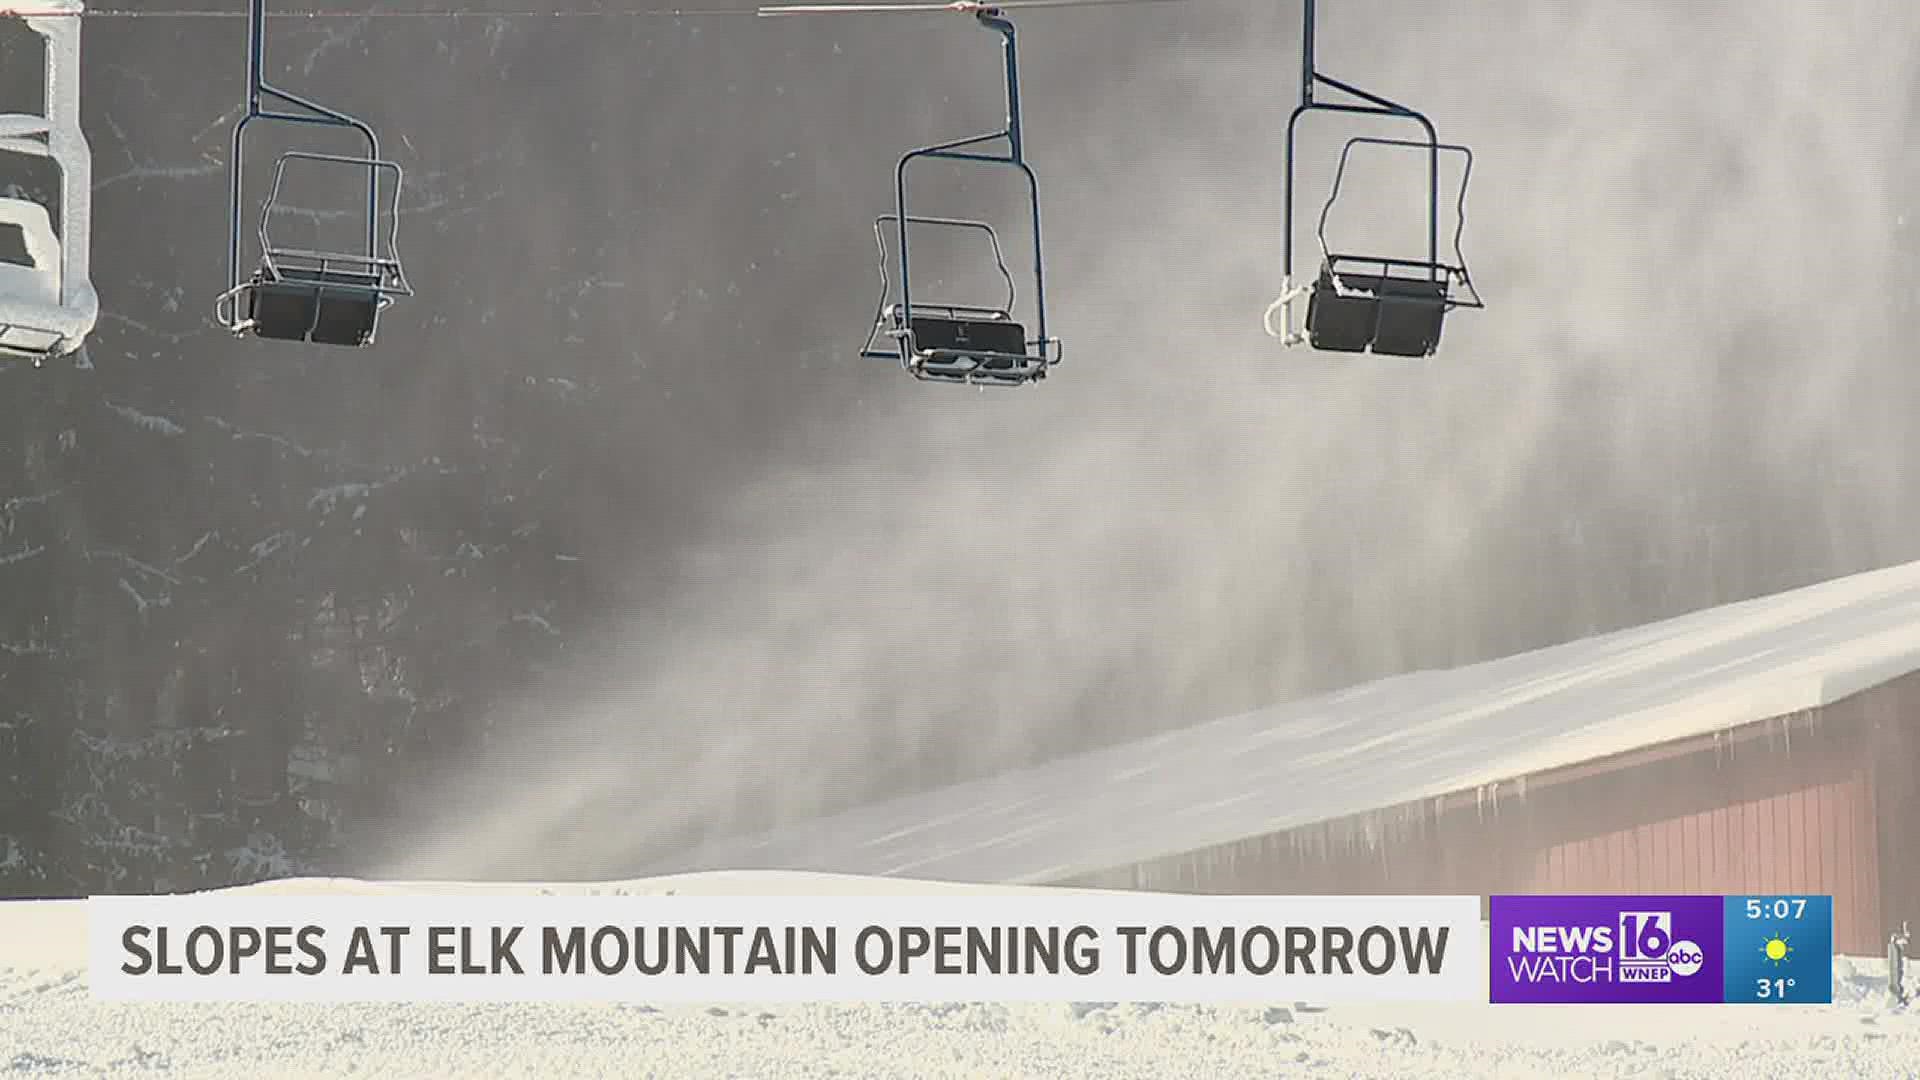 Snow in the forecast is great news for skiers and snowboarders as one ski resort in Susquehanna County readies for opening day.